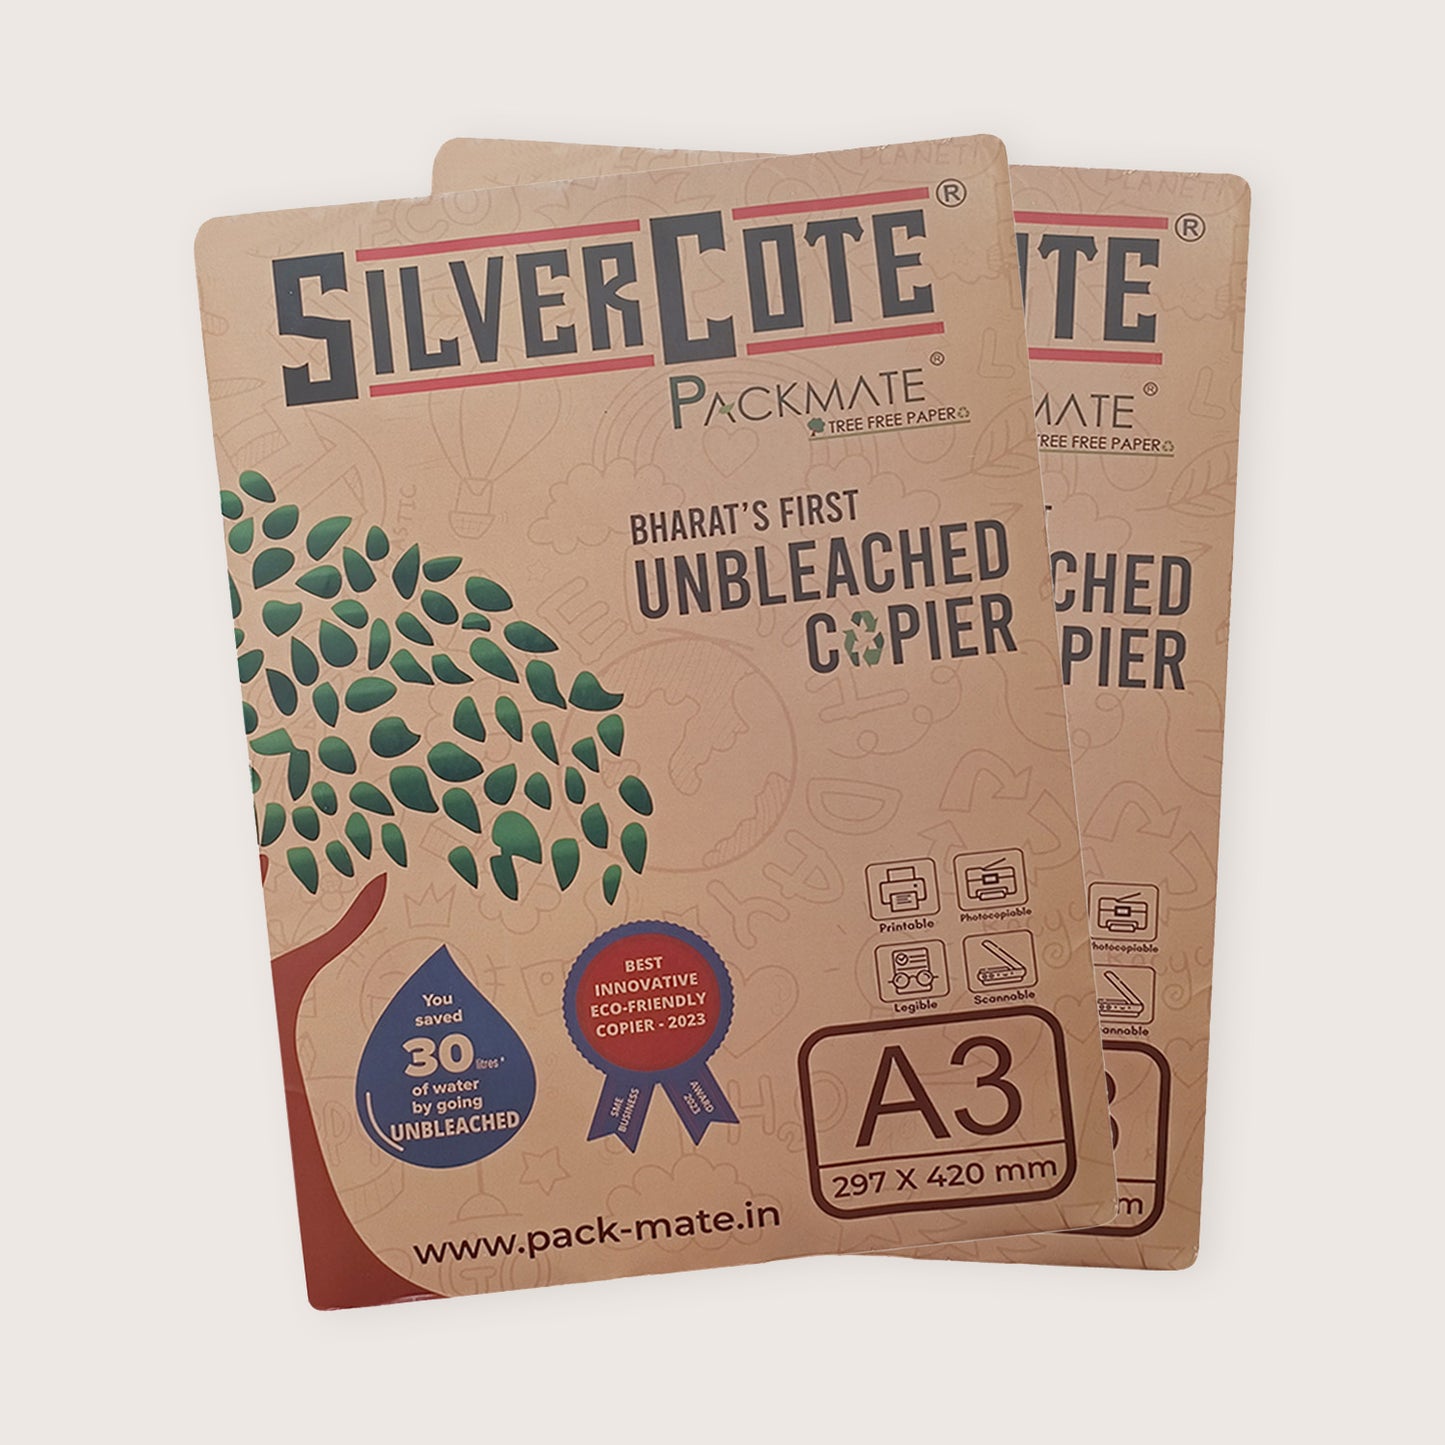 Packmate Silvercote Copier - A3, 1 Ream, 500 Sheet |  Made From 100% Recycled Paper